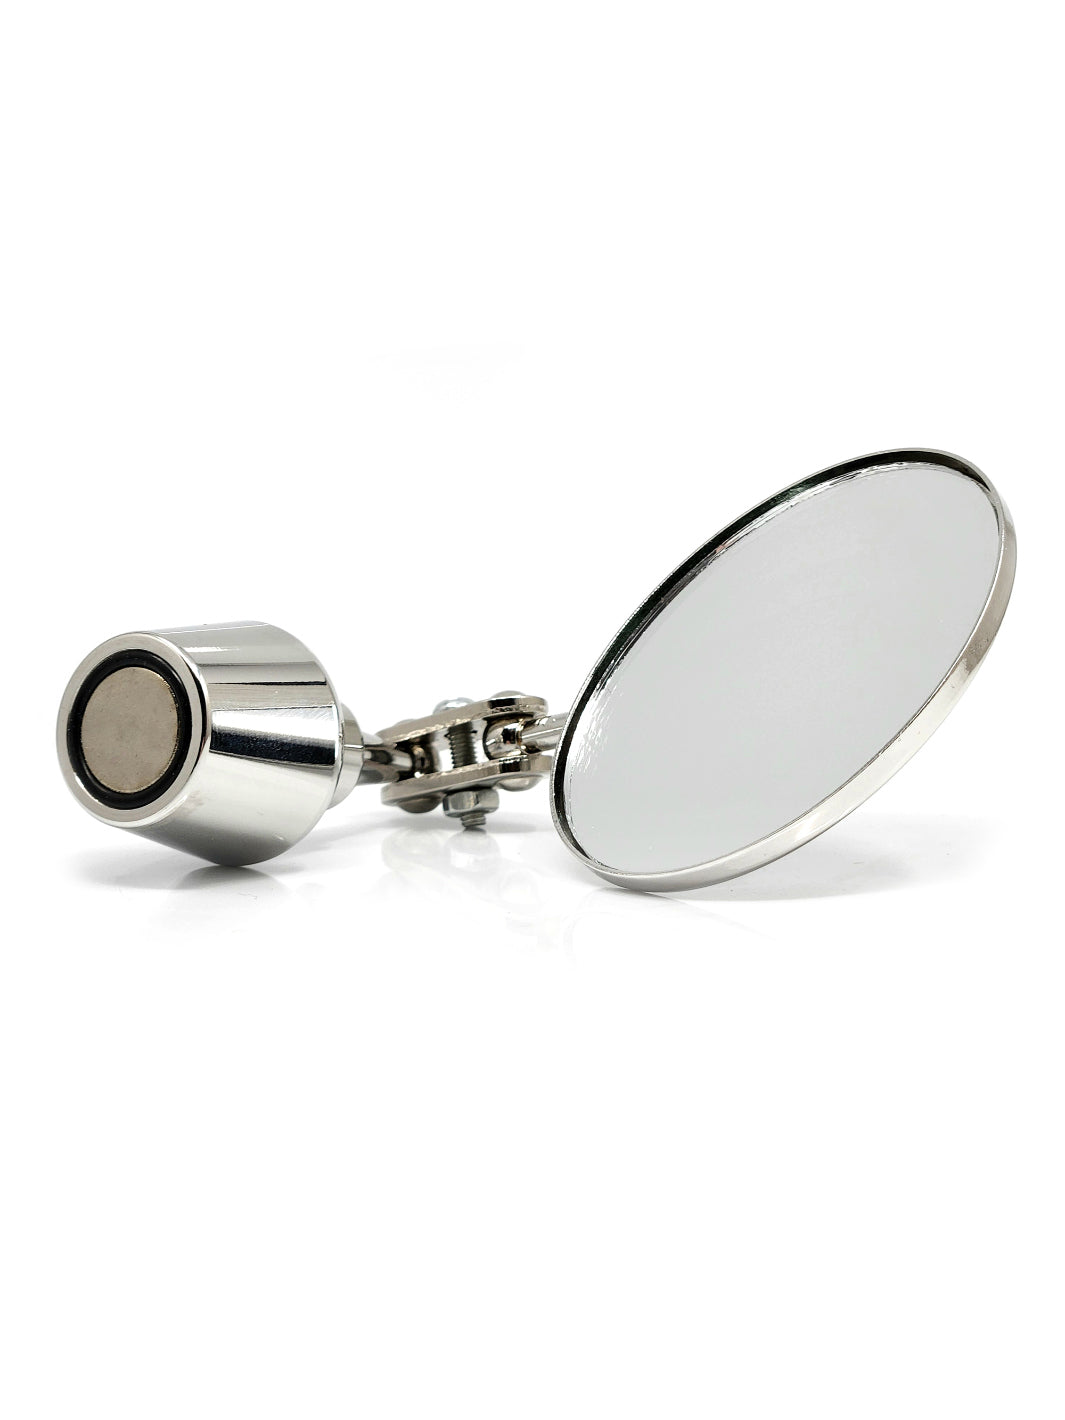 eXcessory Magnetic Mirror - Silver